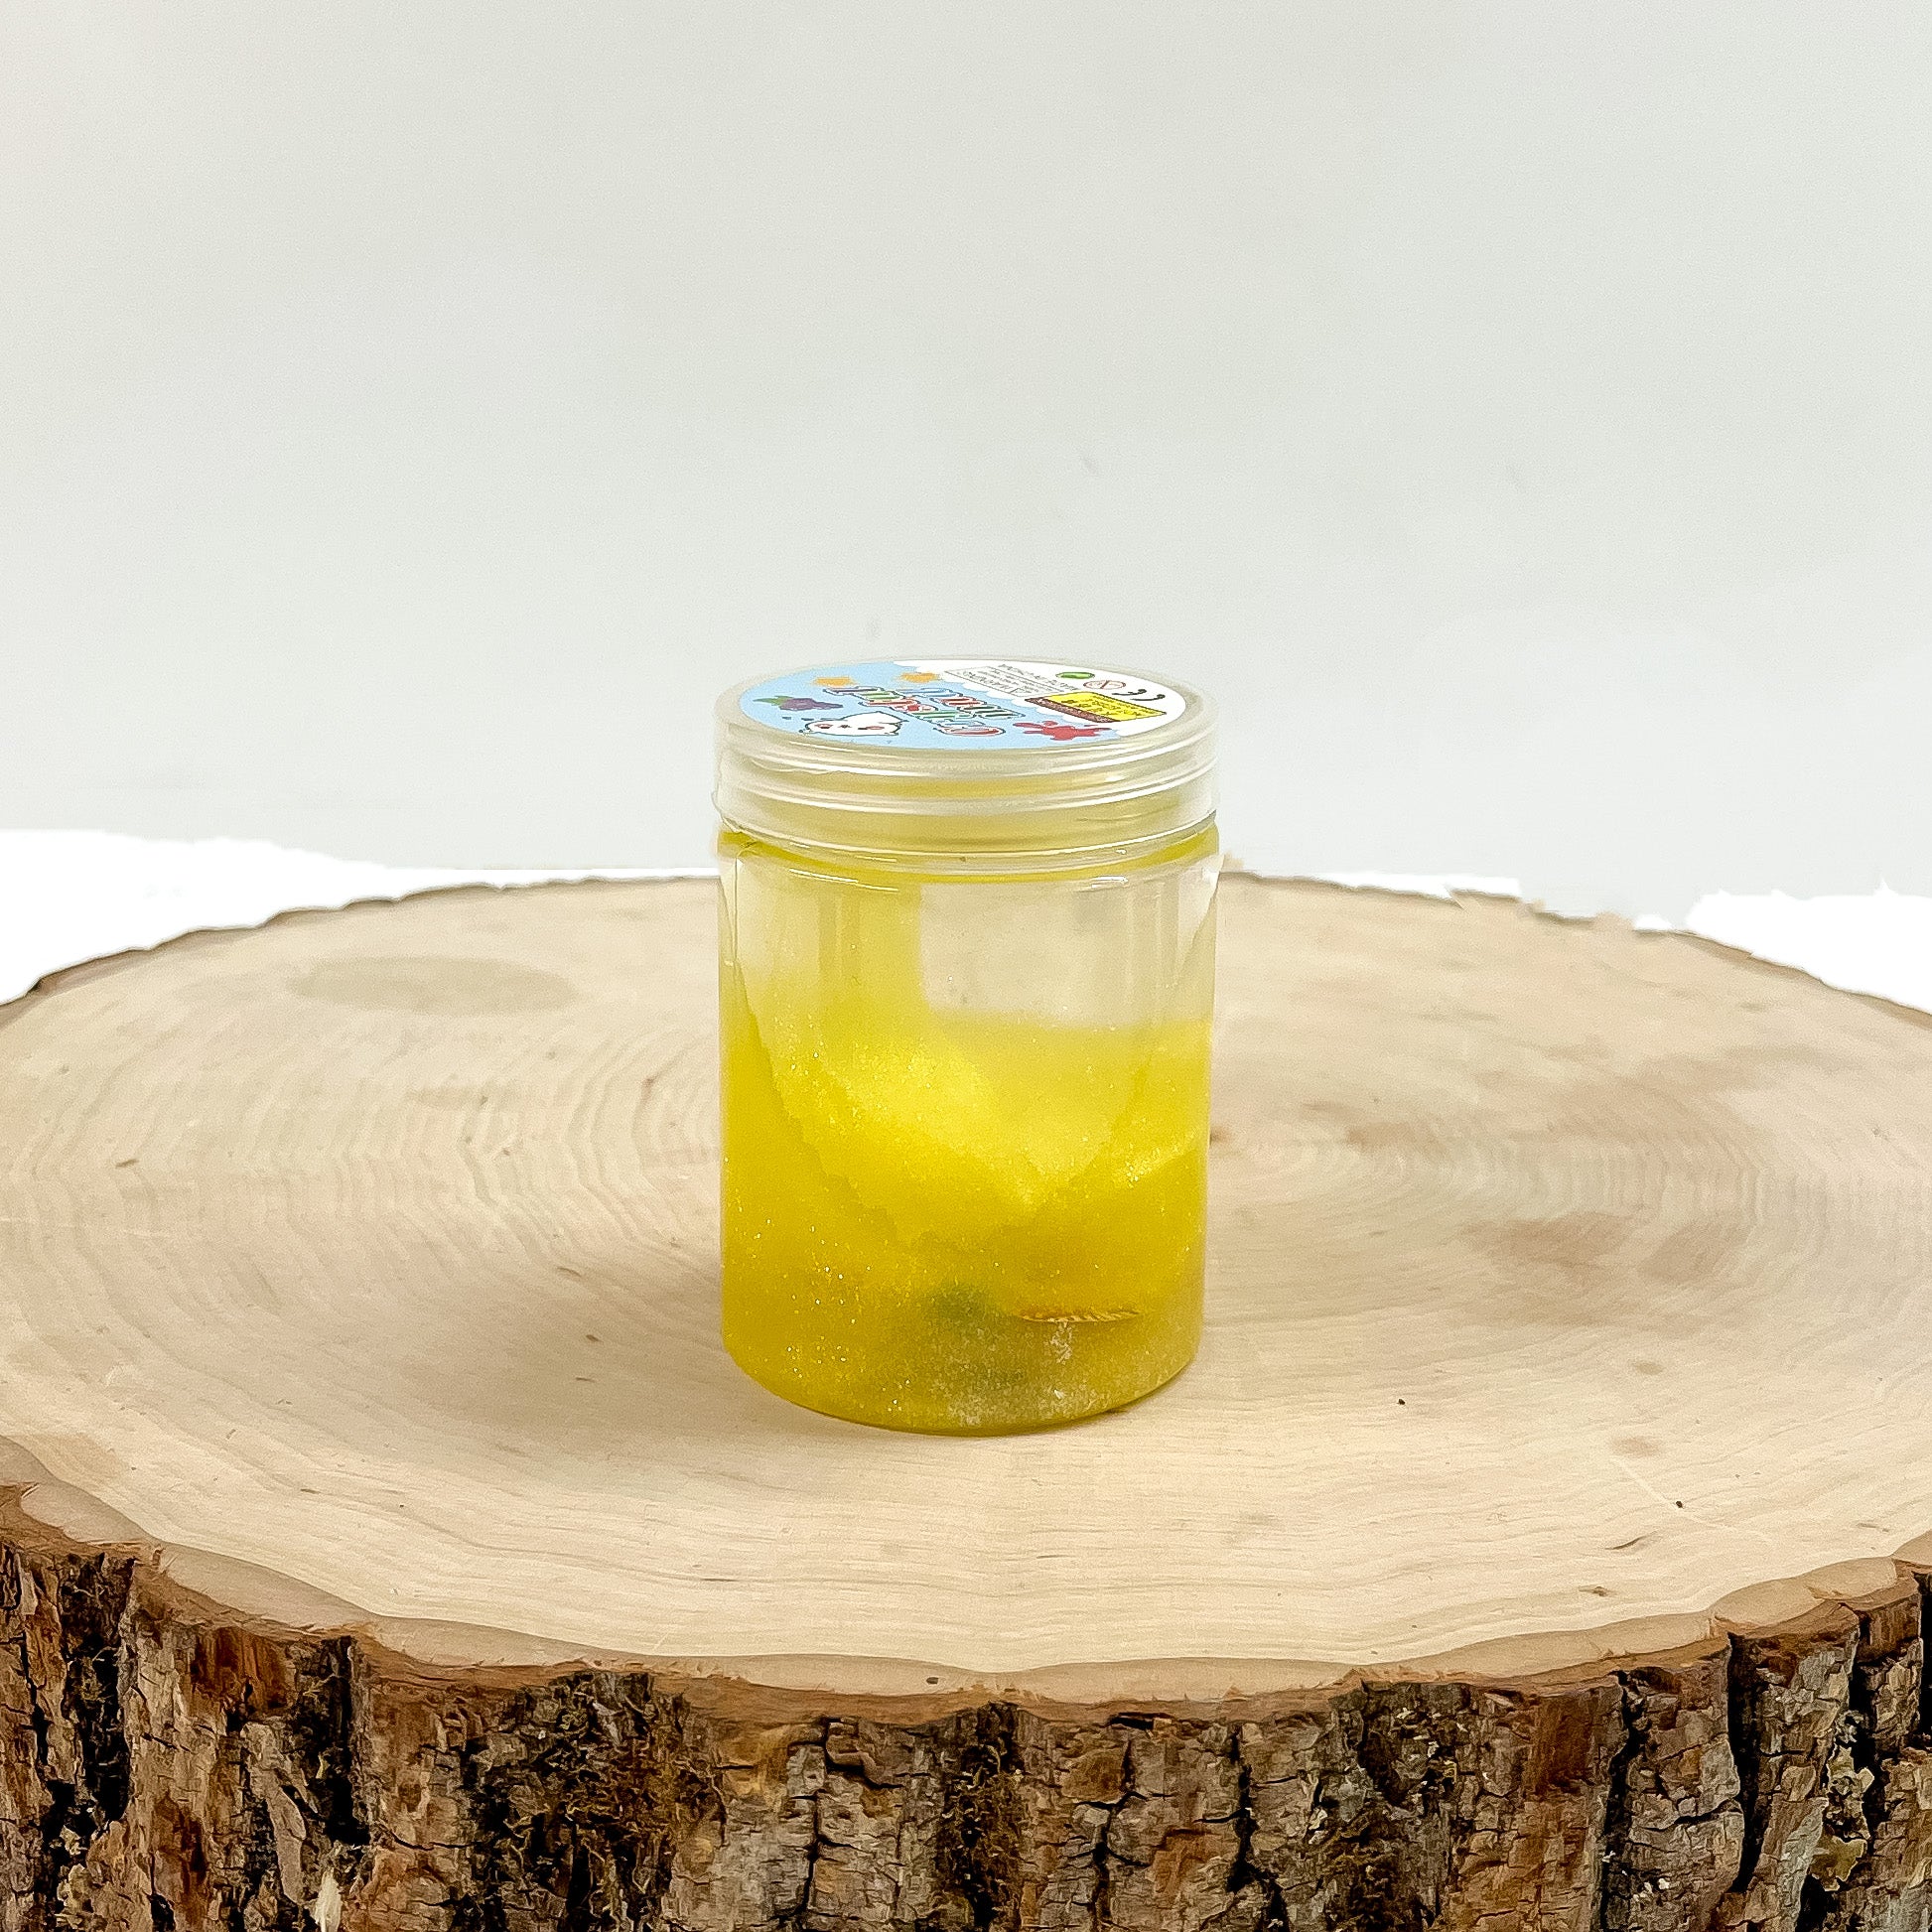 This is a clear slime with yellow glitter, this container is taken on a slab of  wood and on a white background.